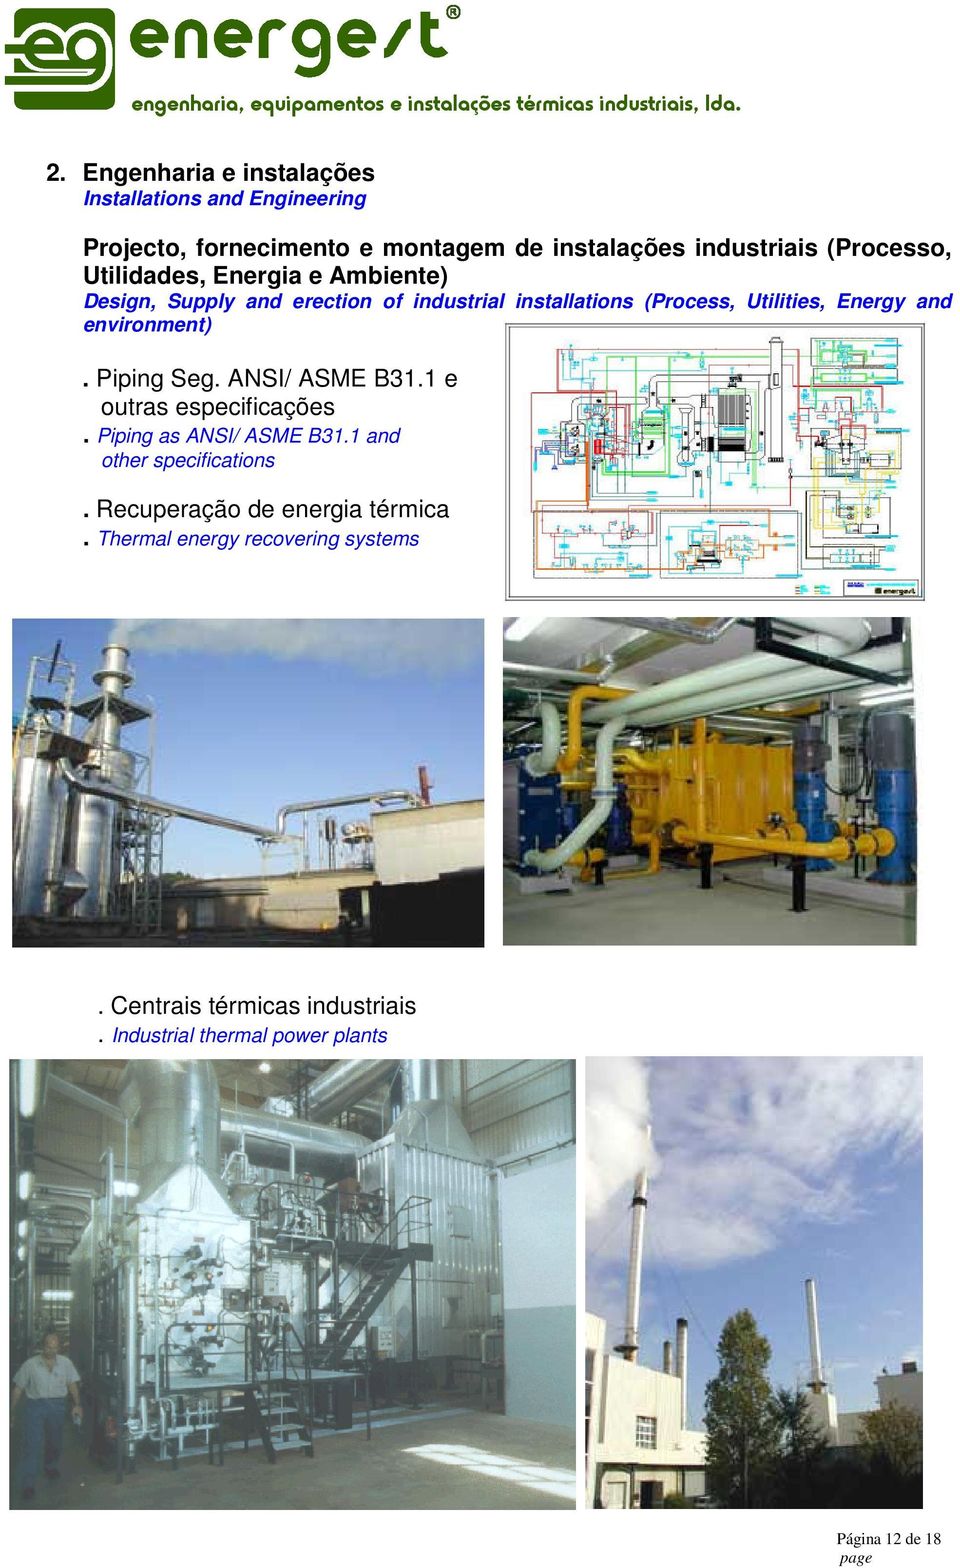 and environment). Piping Seg. ANSI/ ASME B31.1 e outras especificações. Piping as ANSI/ ASME B31.1 and other specifications.